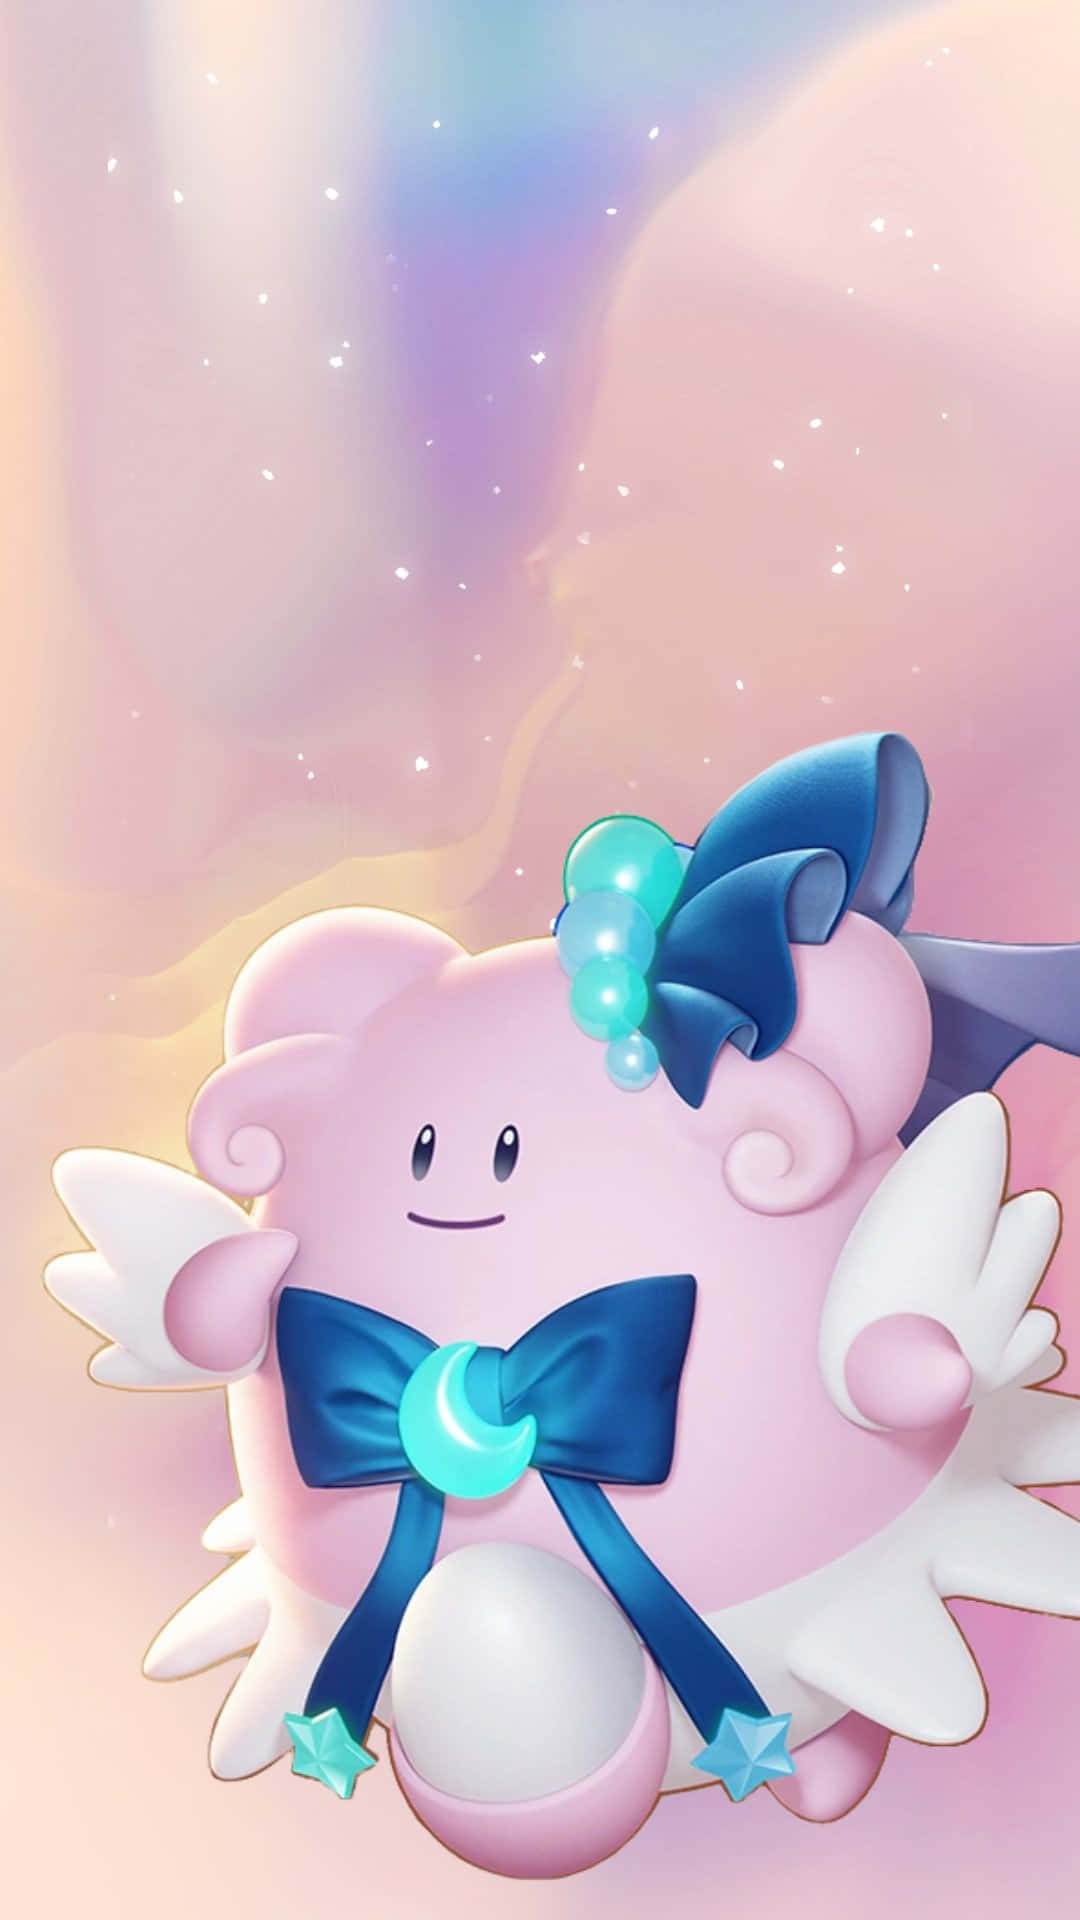 Blissey With Cute Blue Ribbons Wallpaper